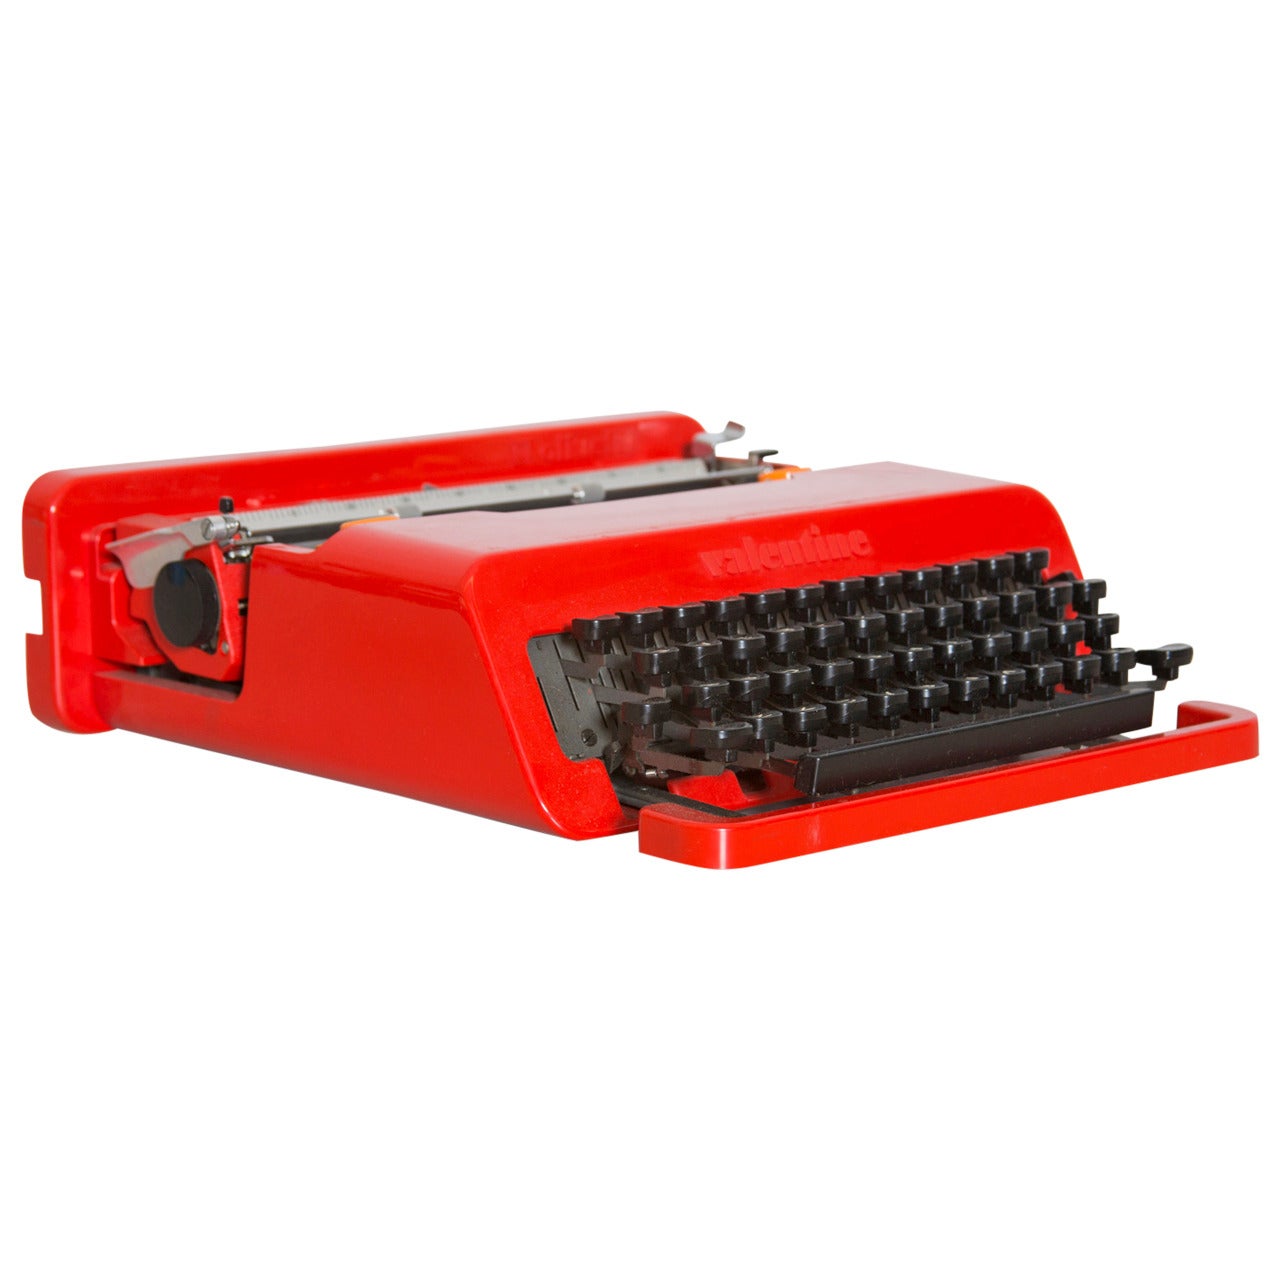 Olivetti Valentine Typewriter by Ettore Sottsass and Perry King, 1969